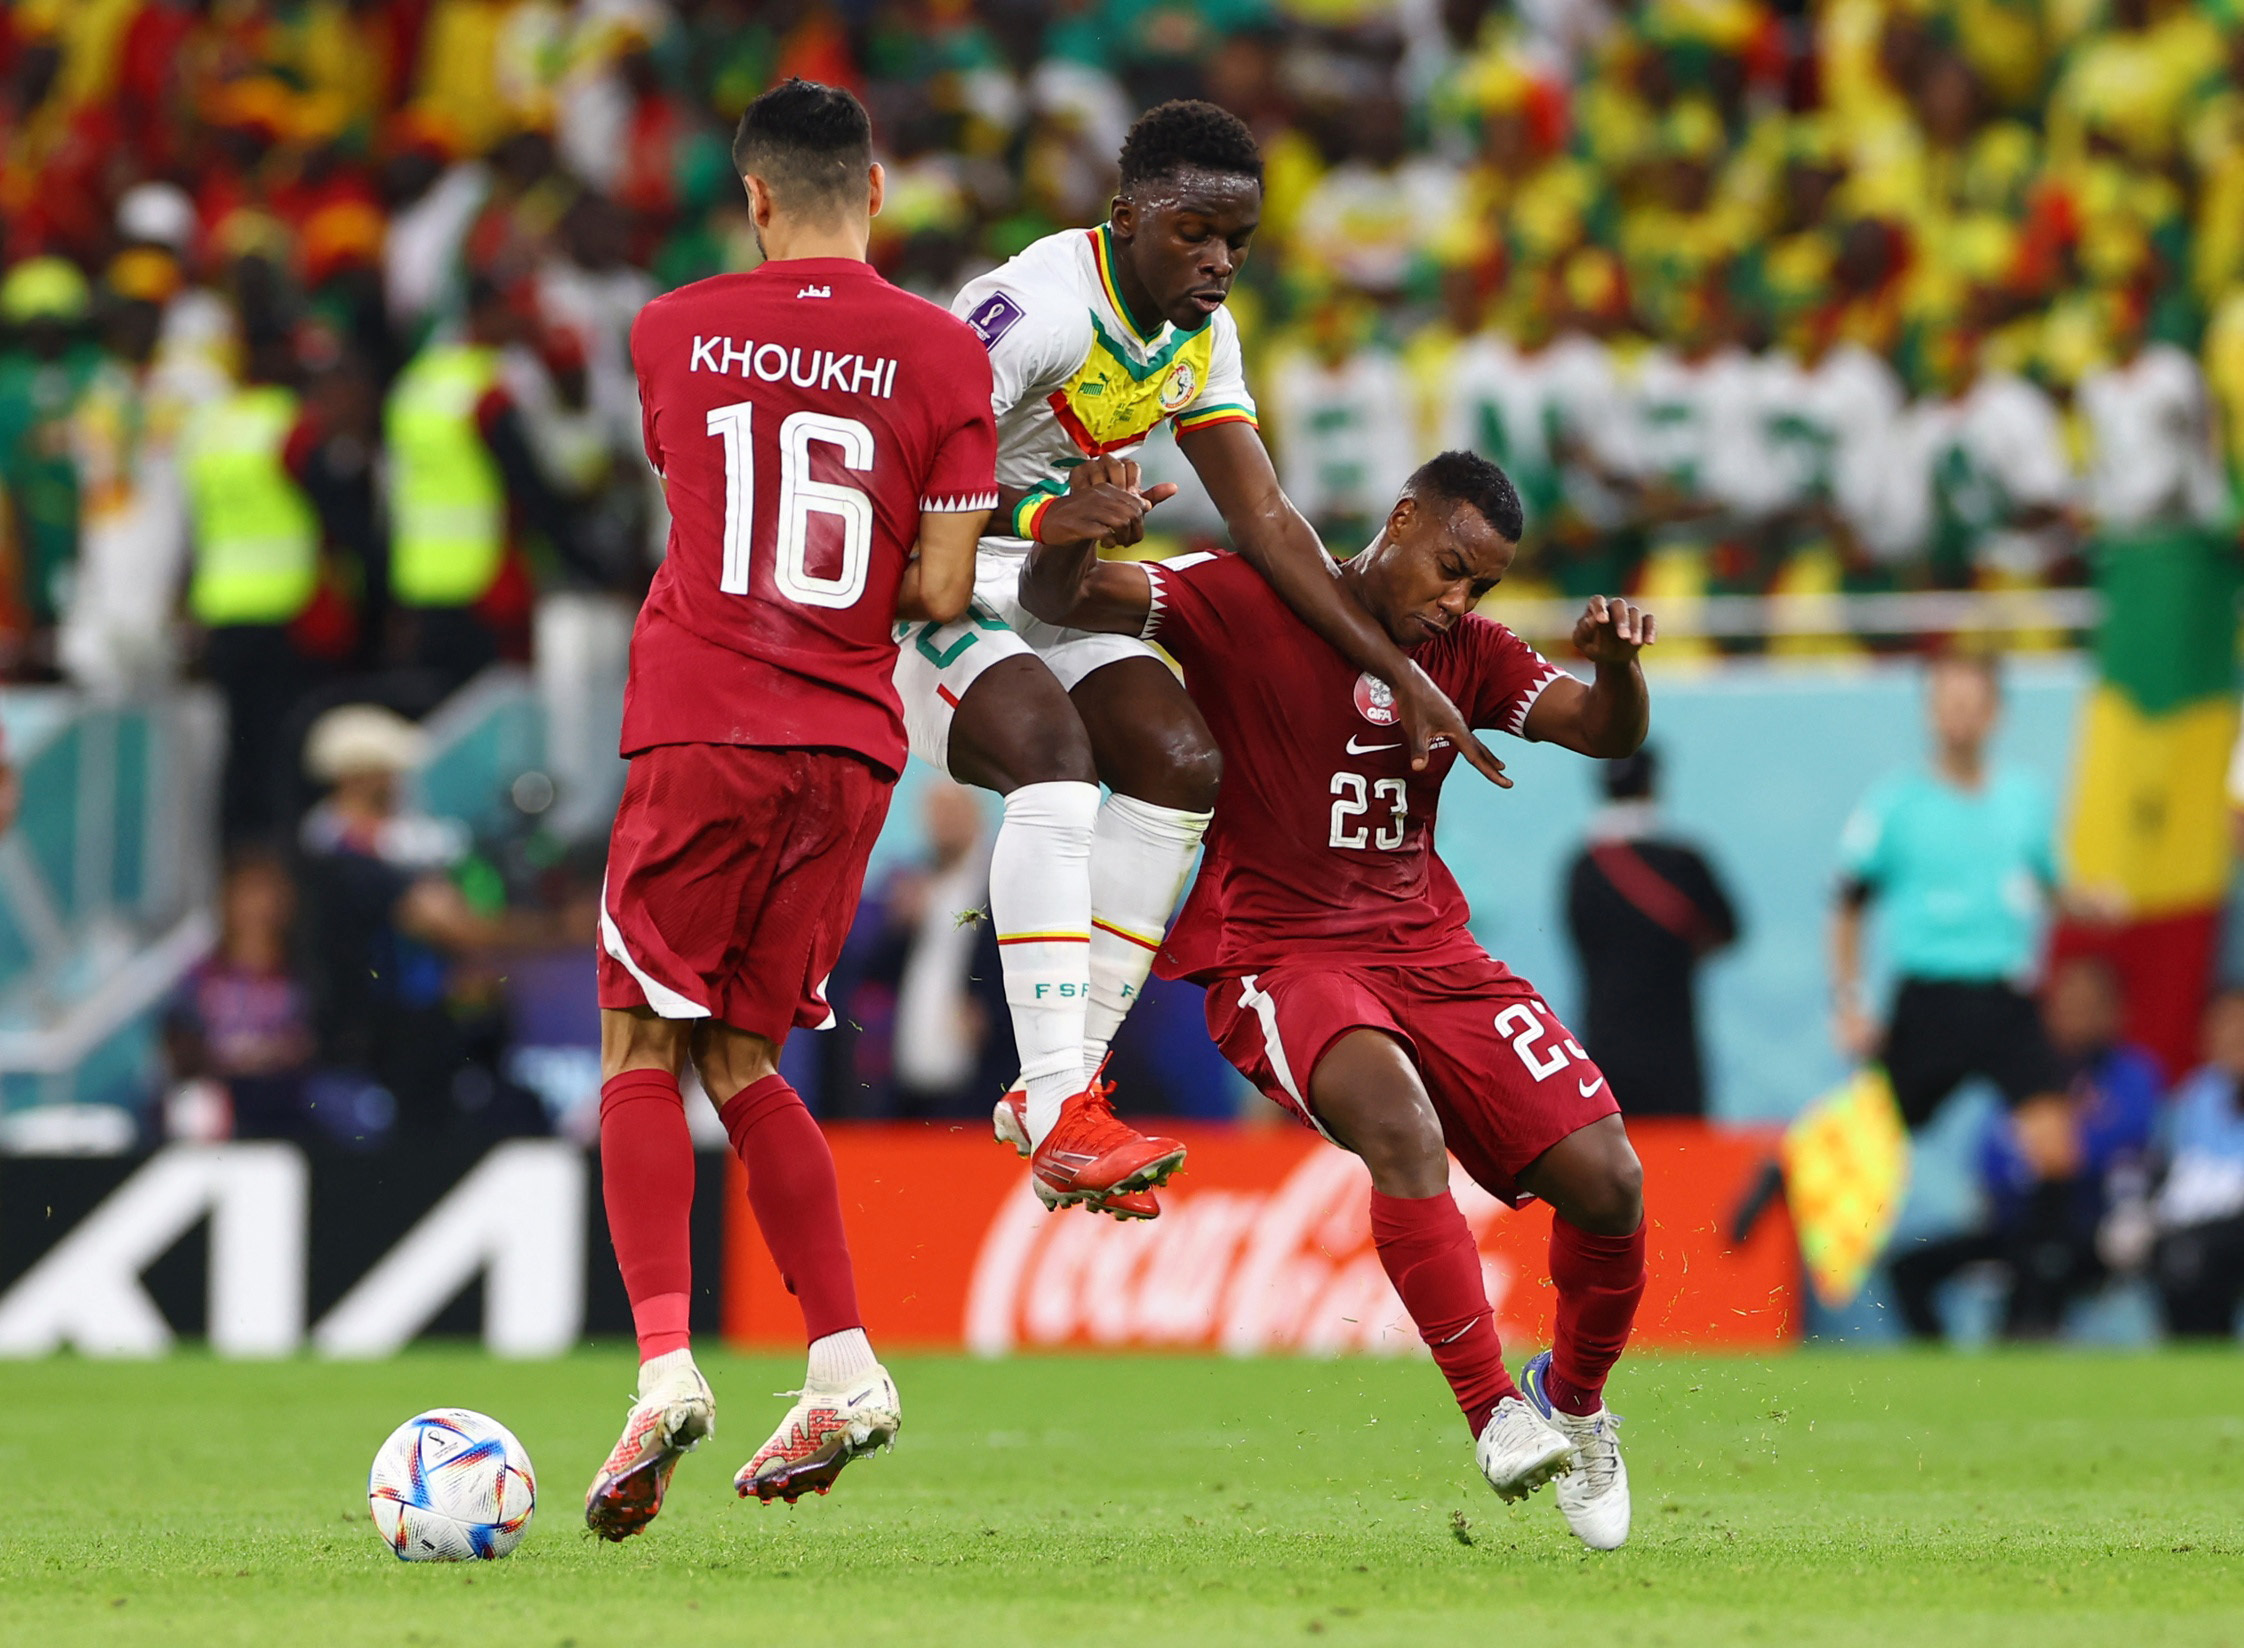 Hosts Qatar on verge of elimination after 3-1 loss to Senegal | Reuters